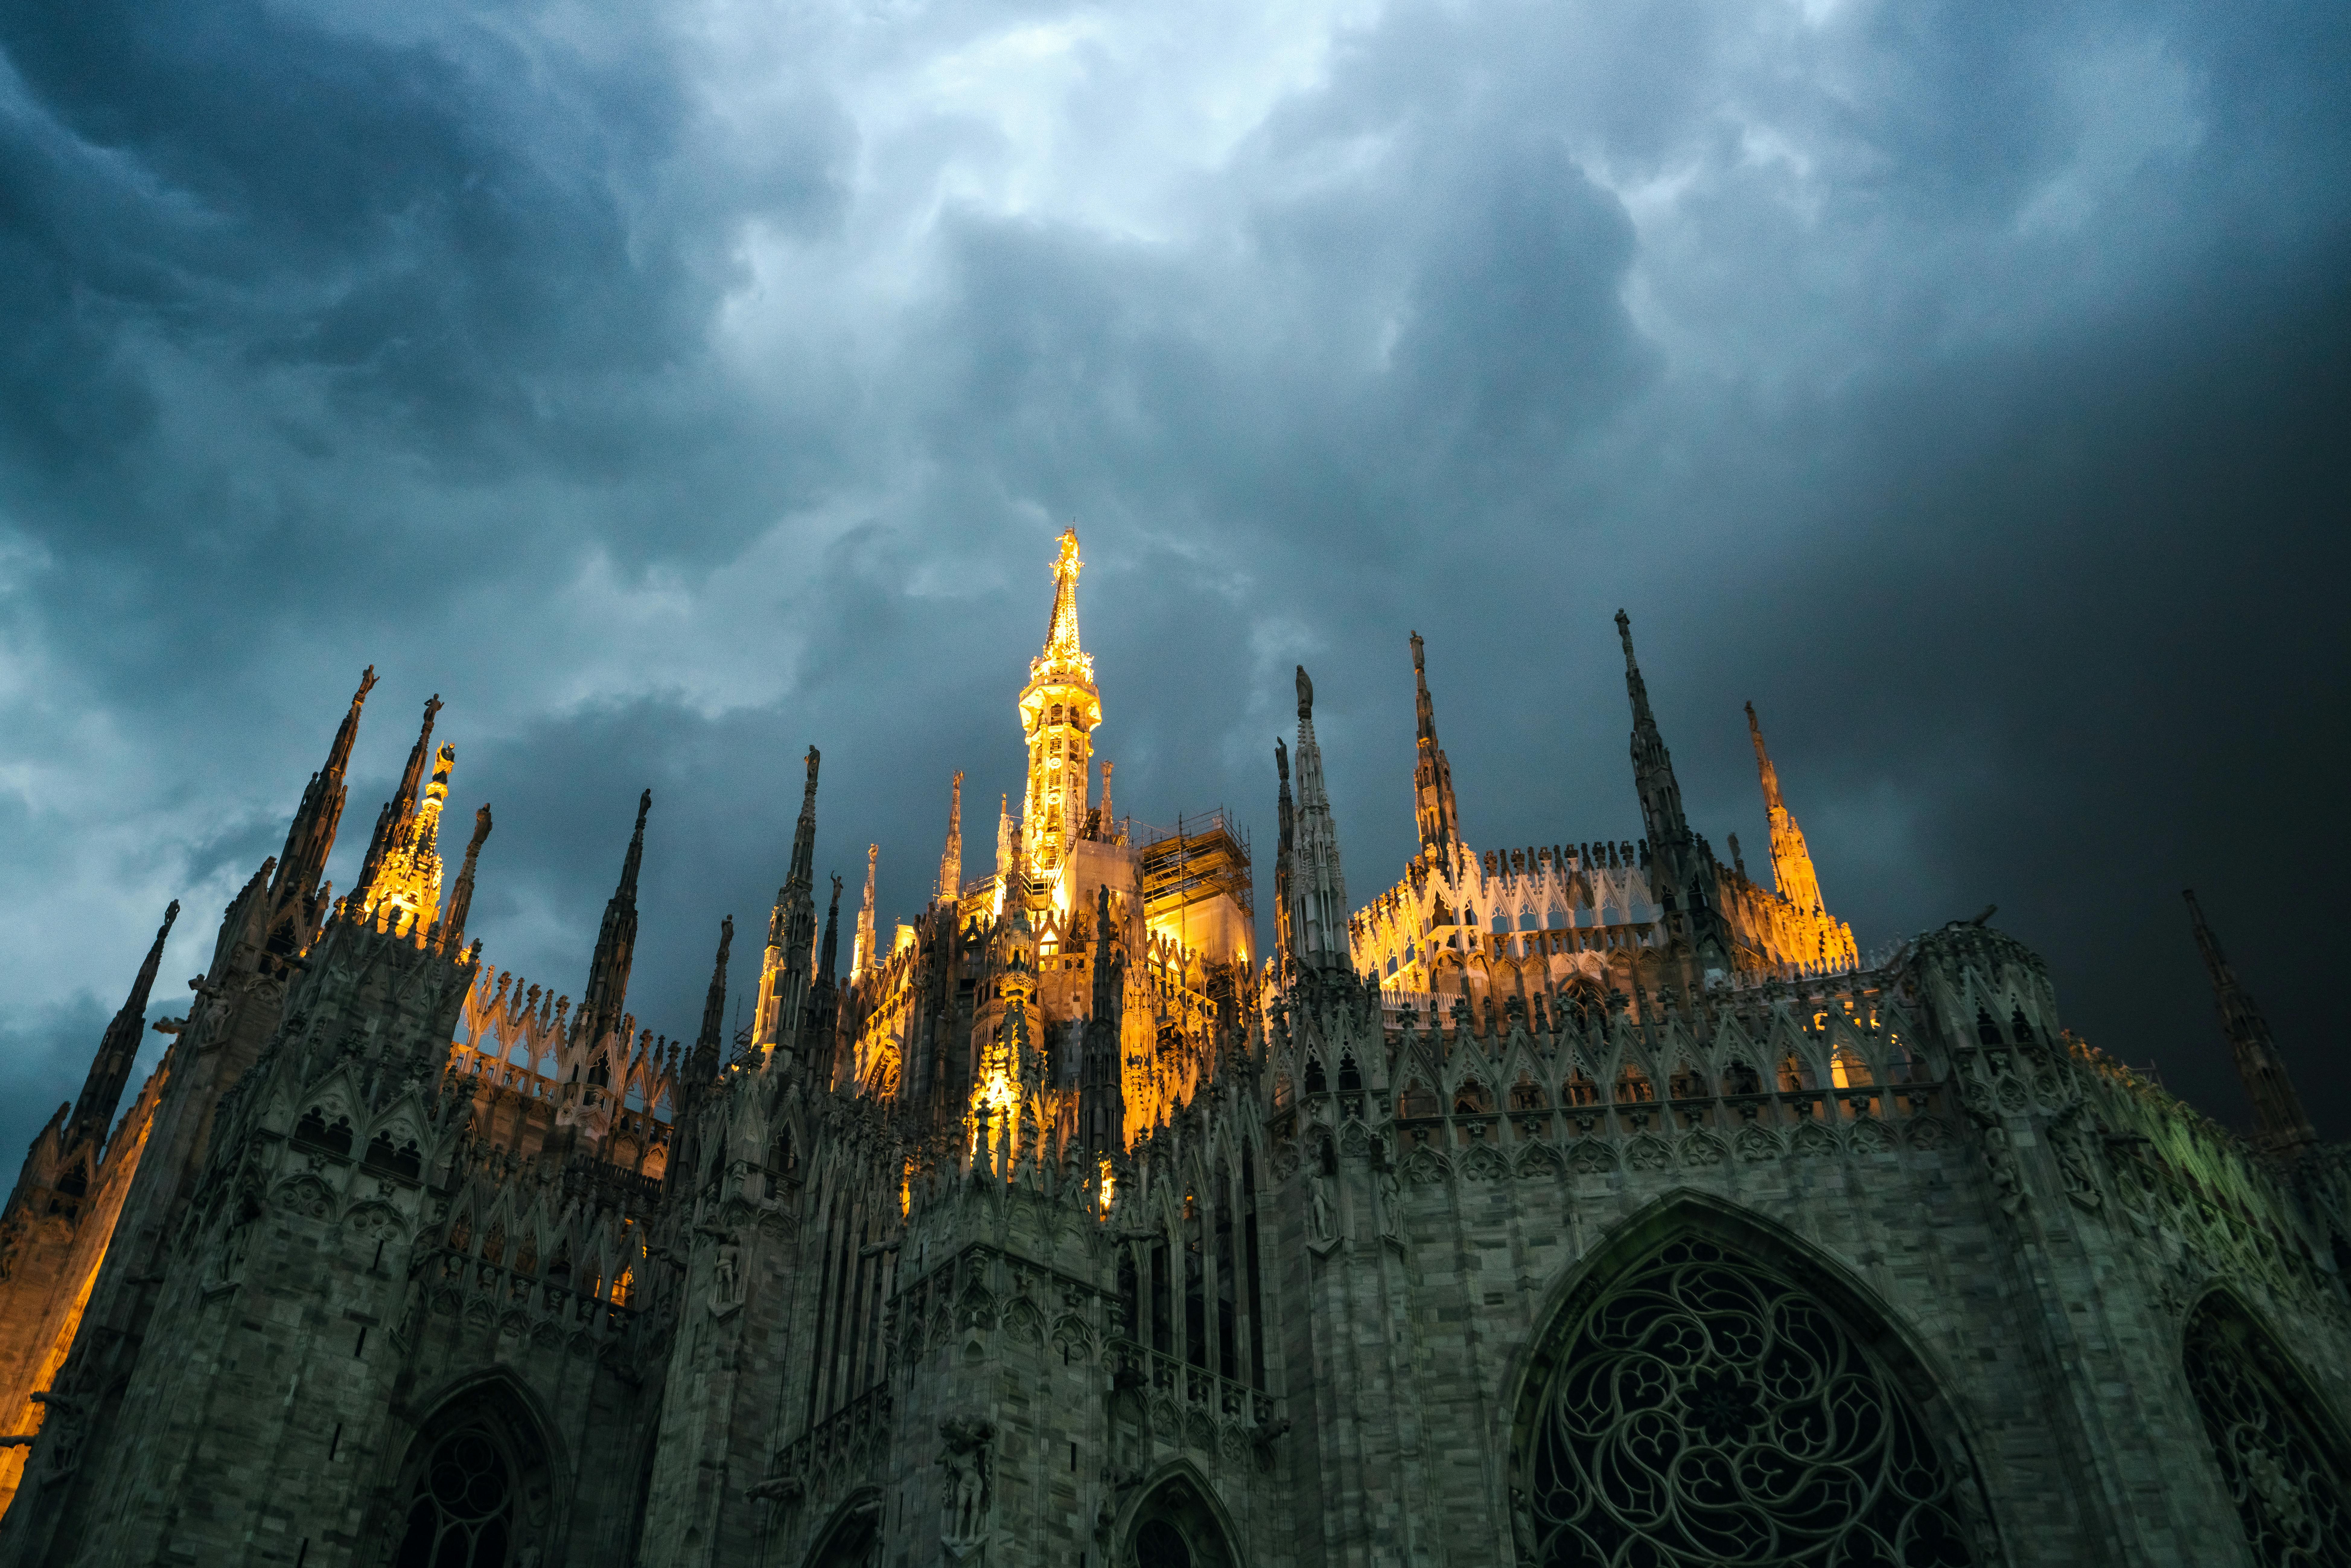 milan cathedral with glowing sharp spires under overcast sky